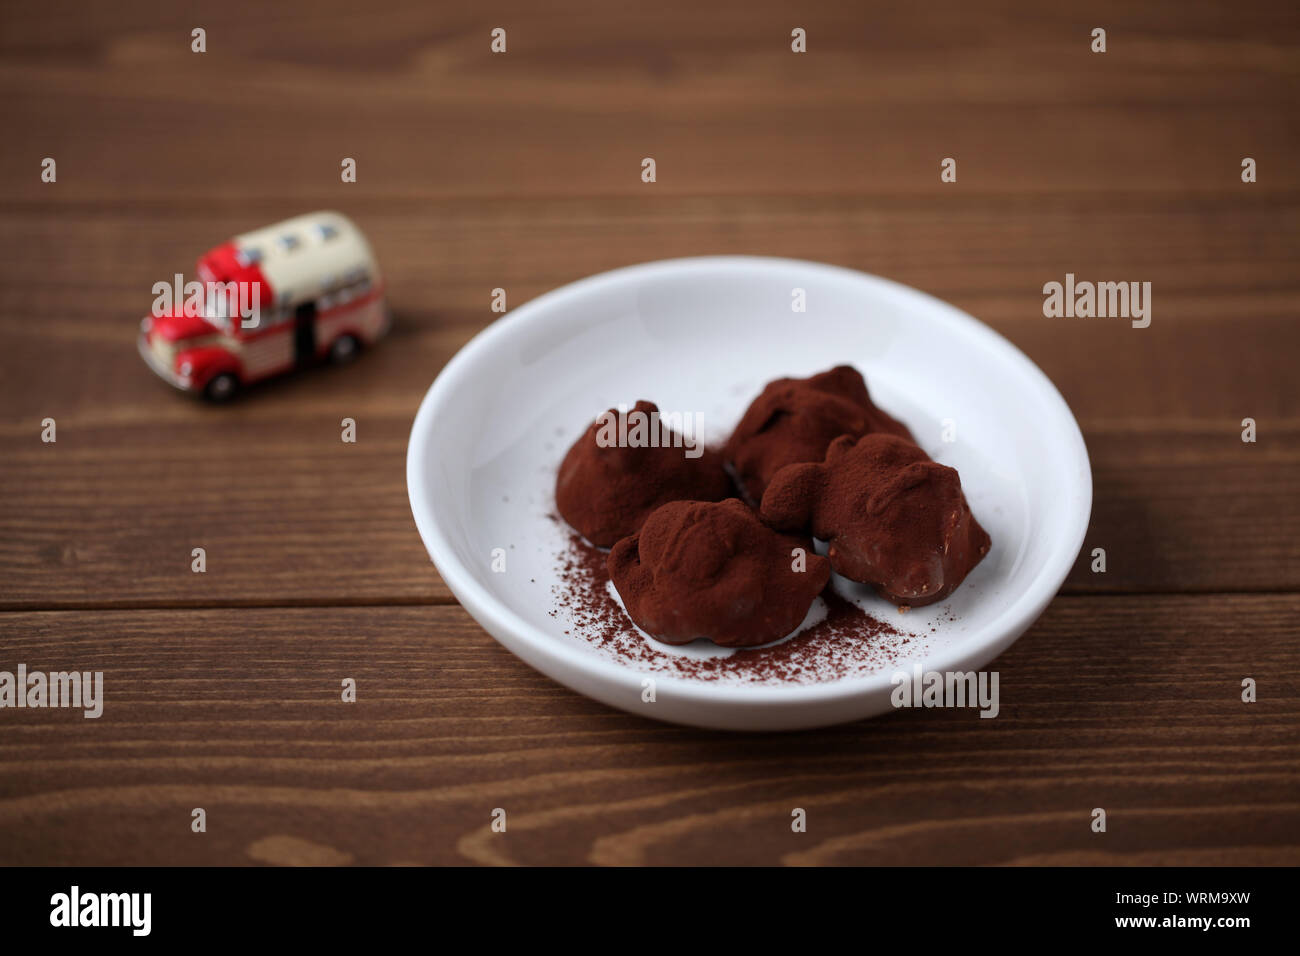 chocolate ganache crunch isolated on wooden table Stock Photo